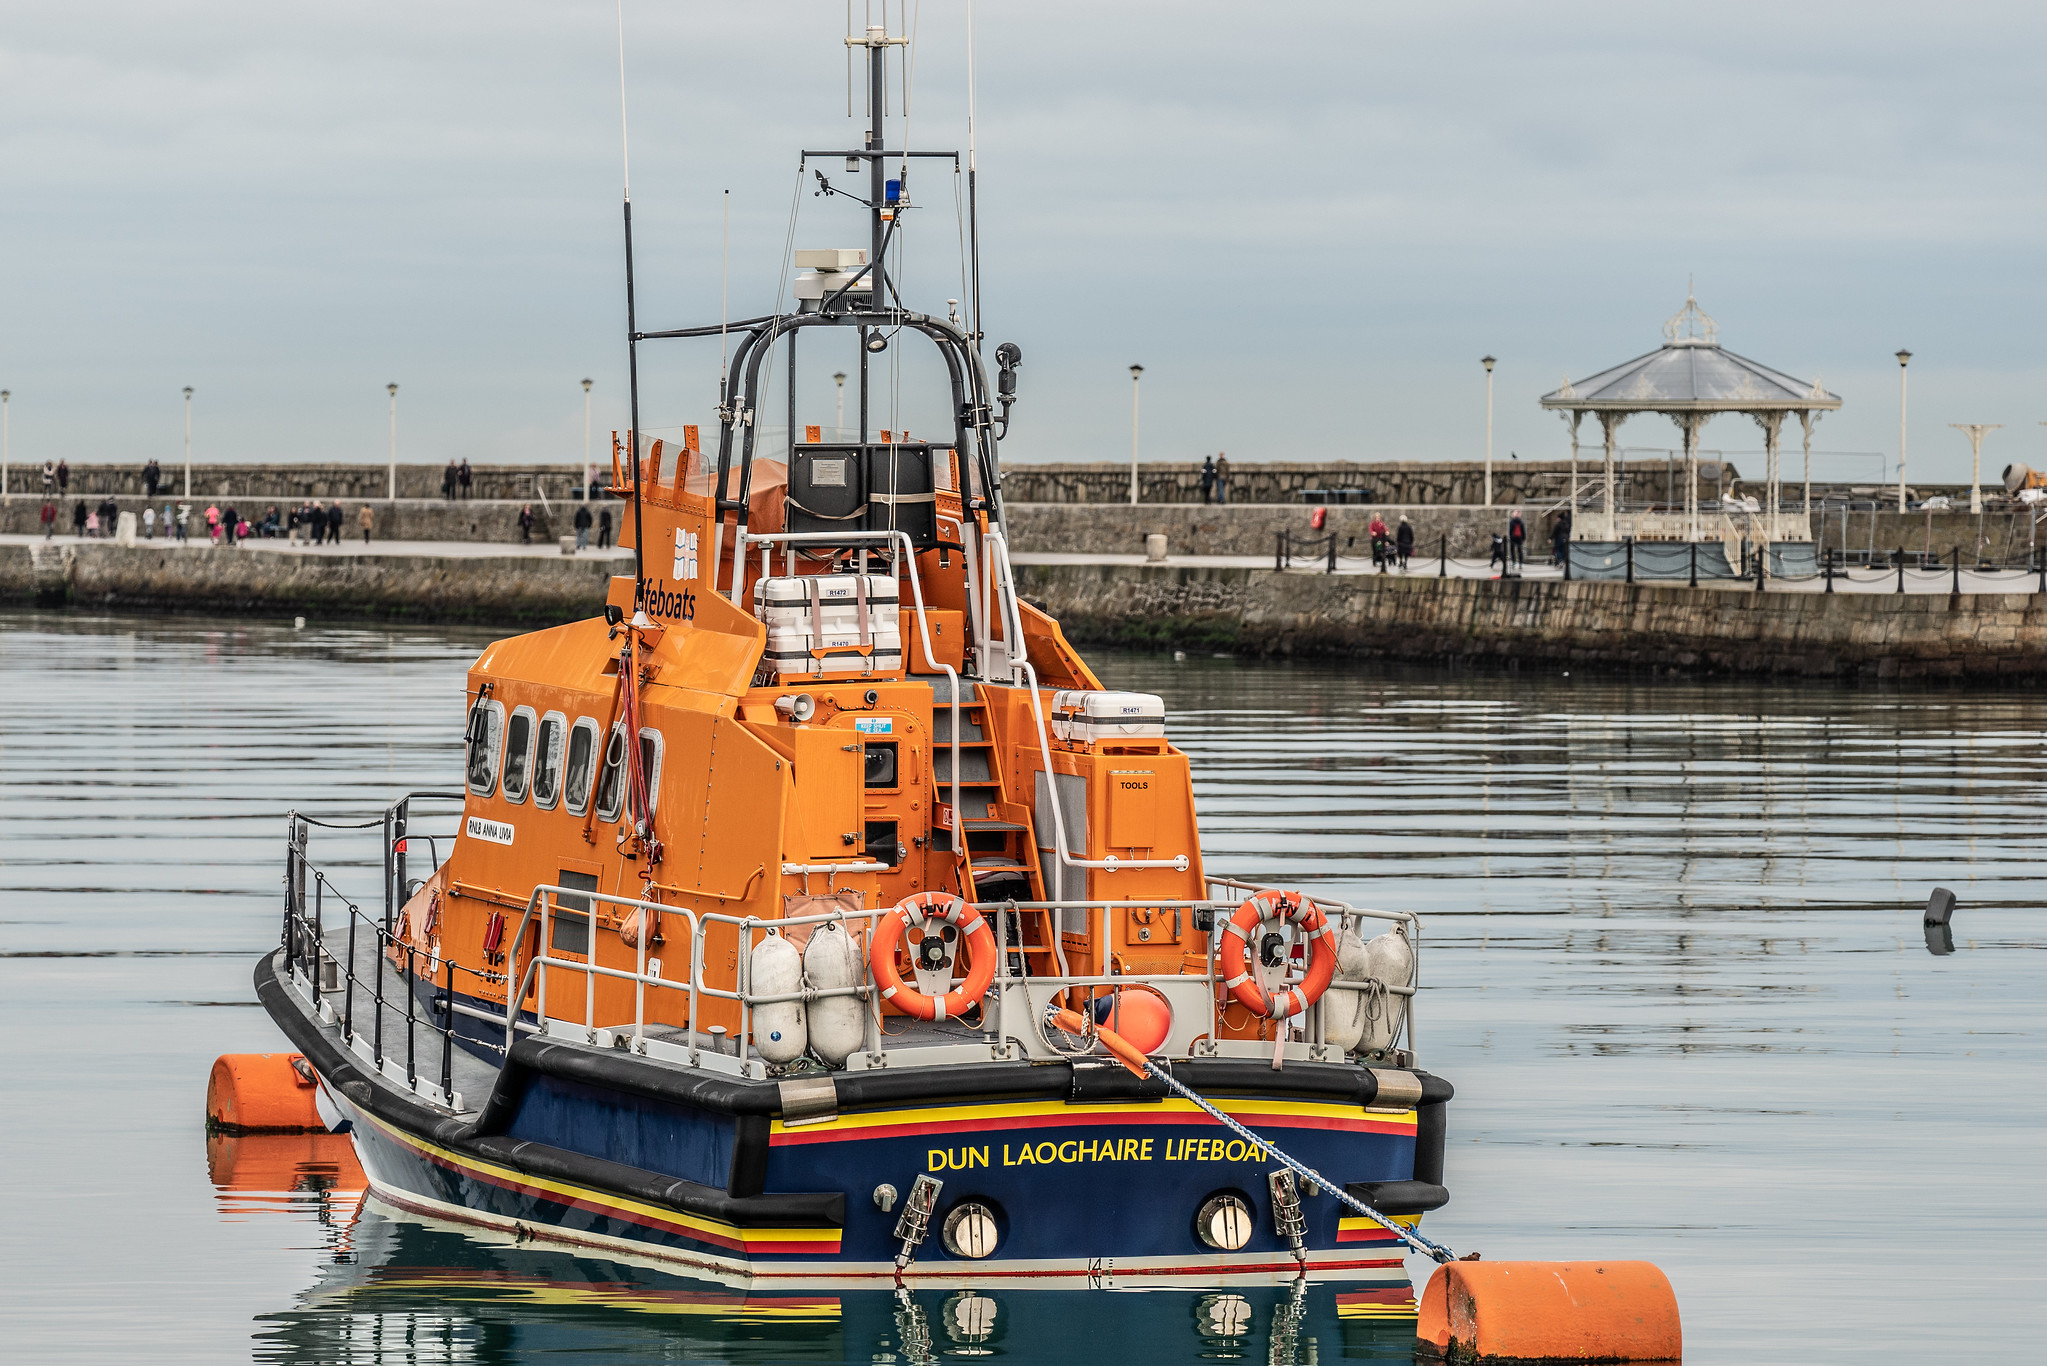 Dun Laoghaire Lifeboat